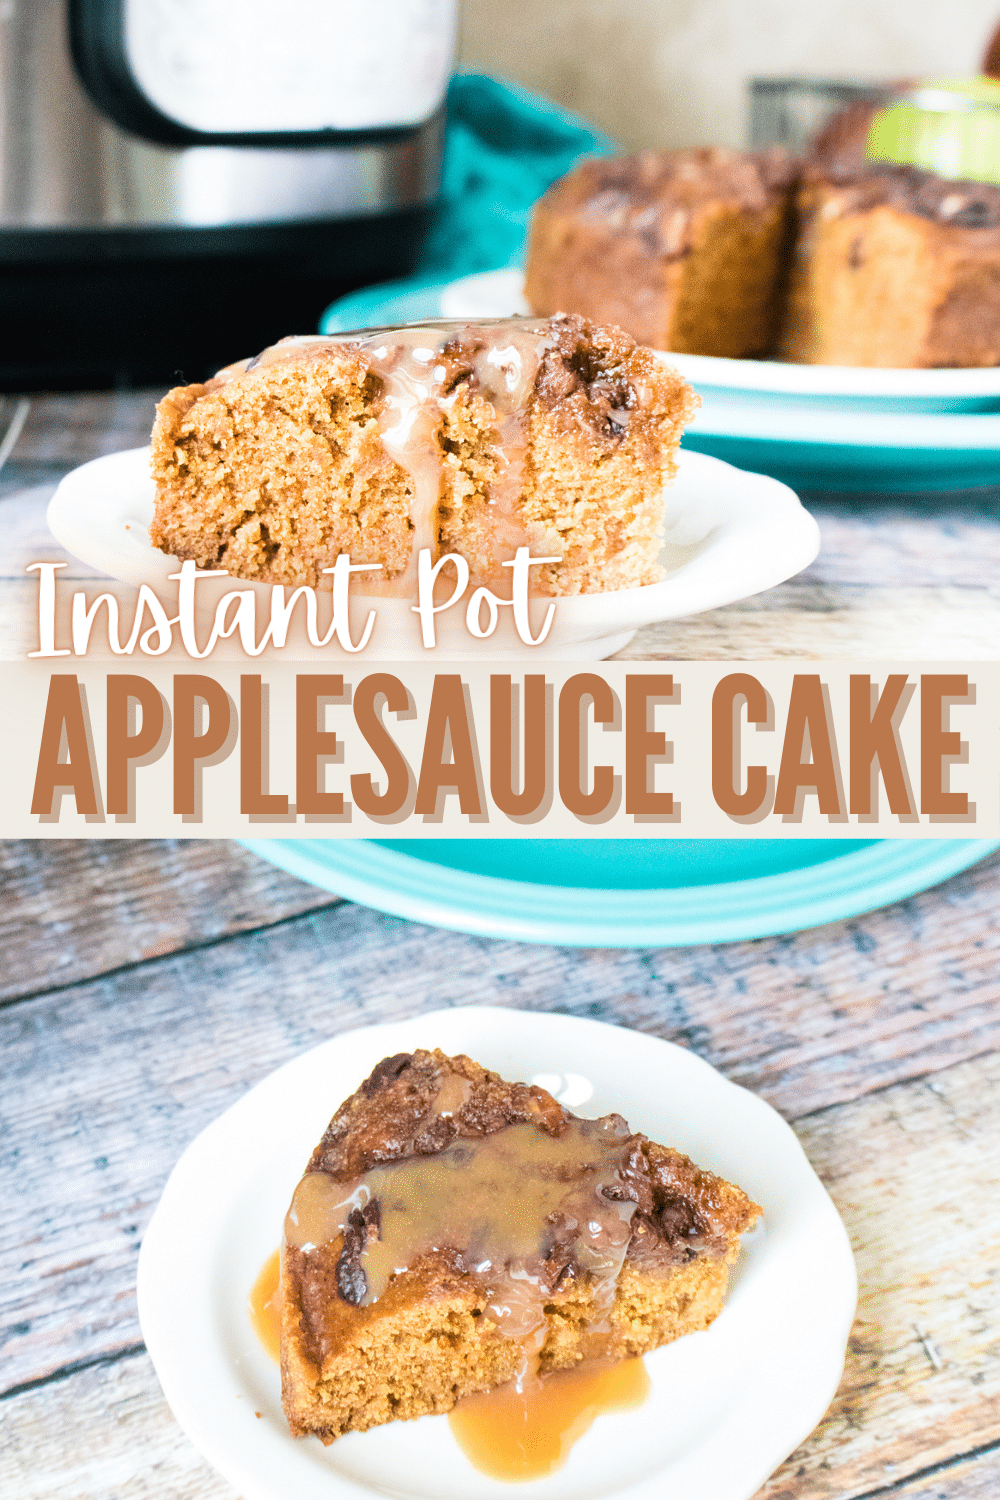 Instant Pot Applesauce Cake is a moist and delicious cake perfect for Fall! With just a few simple ingredients, it comes together quickly. #instantpot #pressurecooker #applesaucecake #cakerecipe via @wondermomwannab